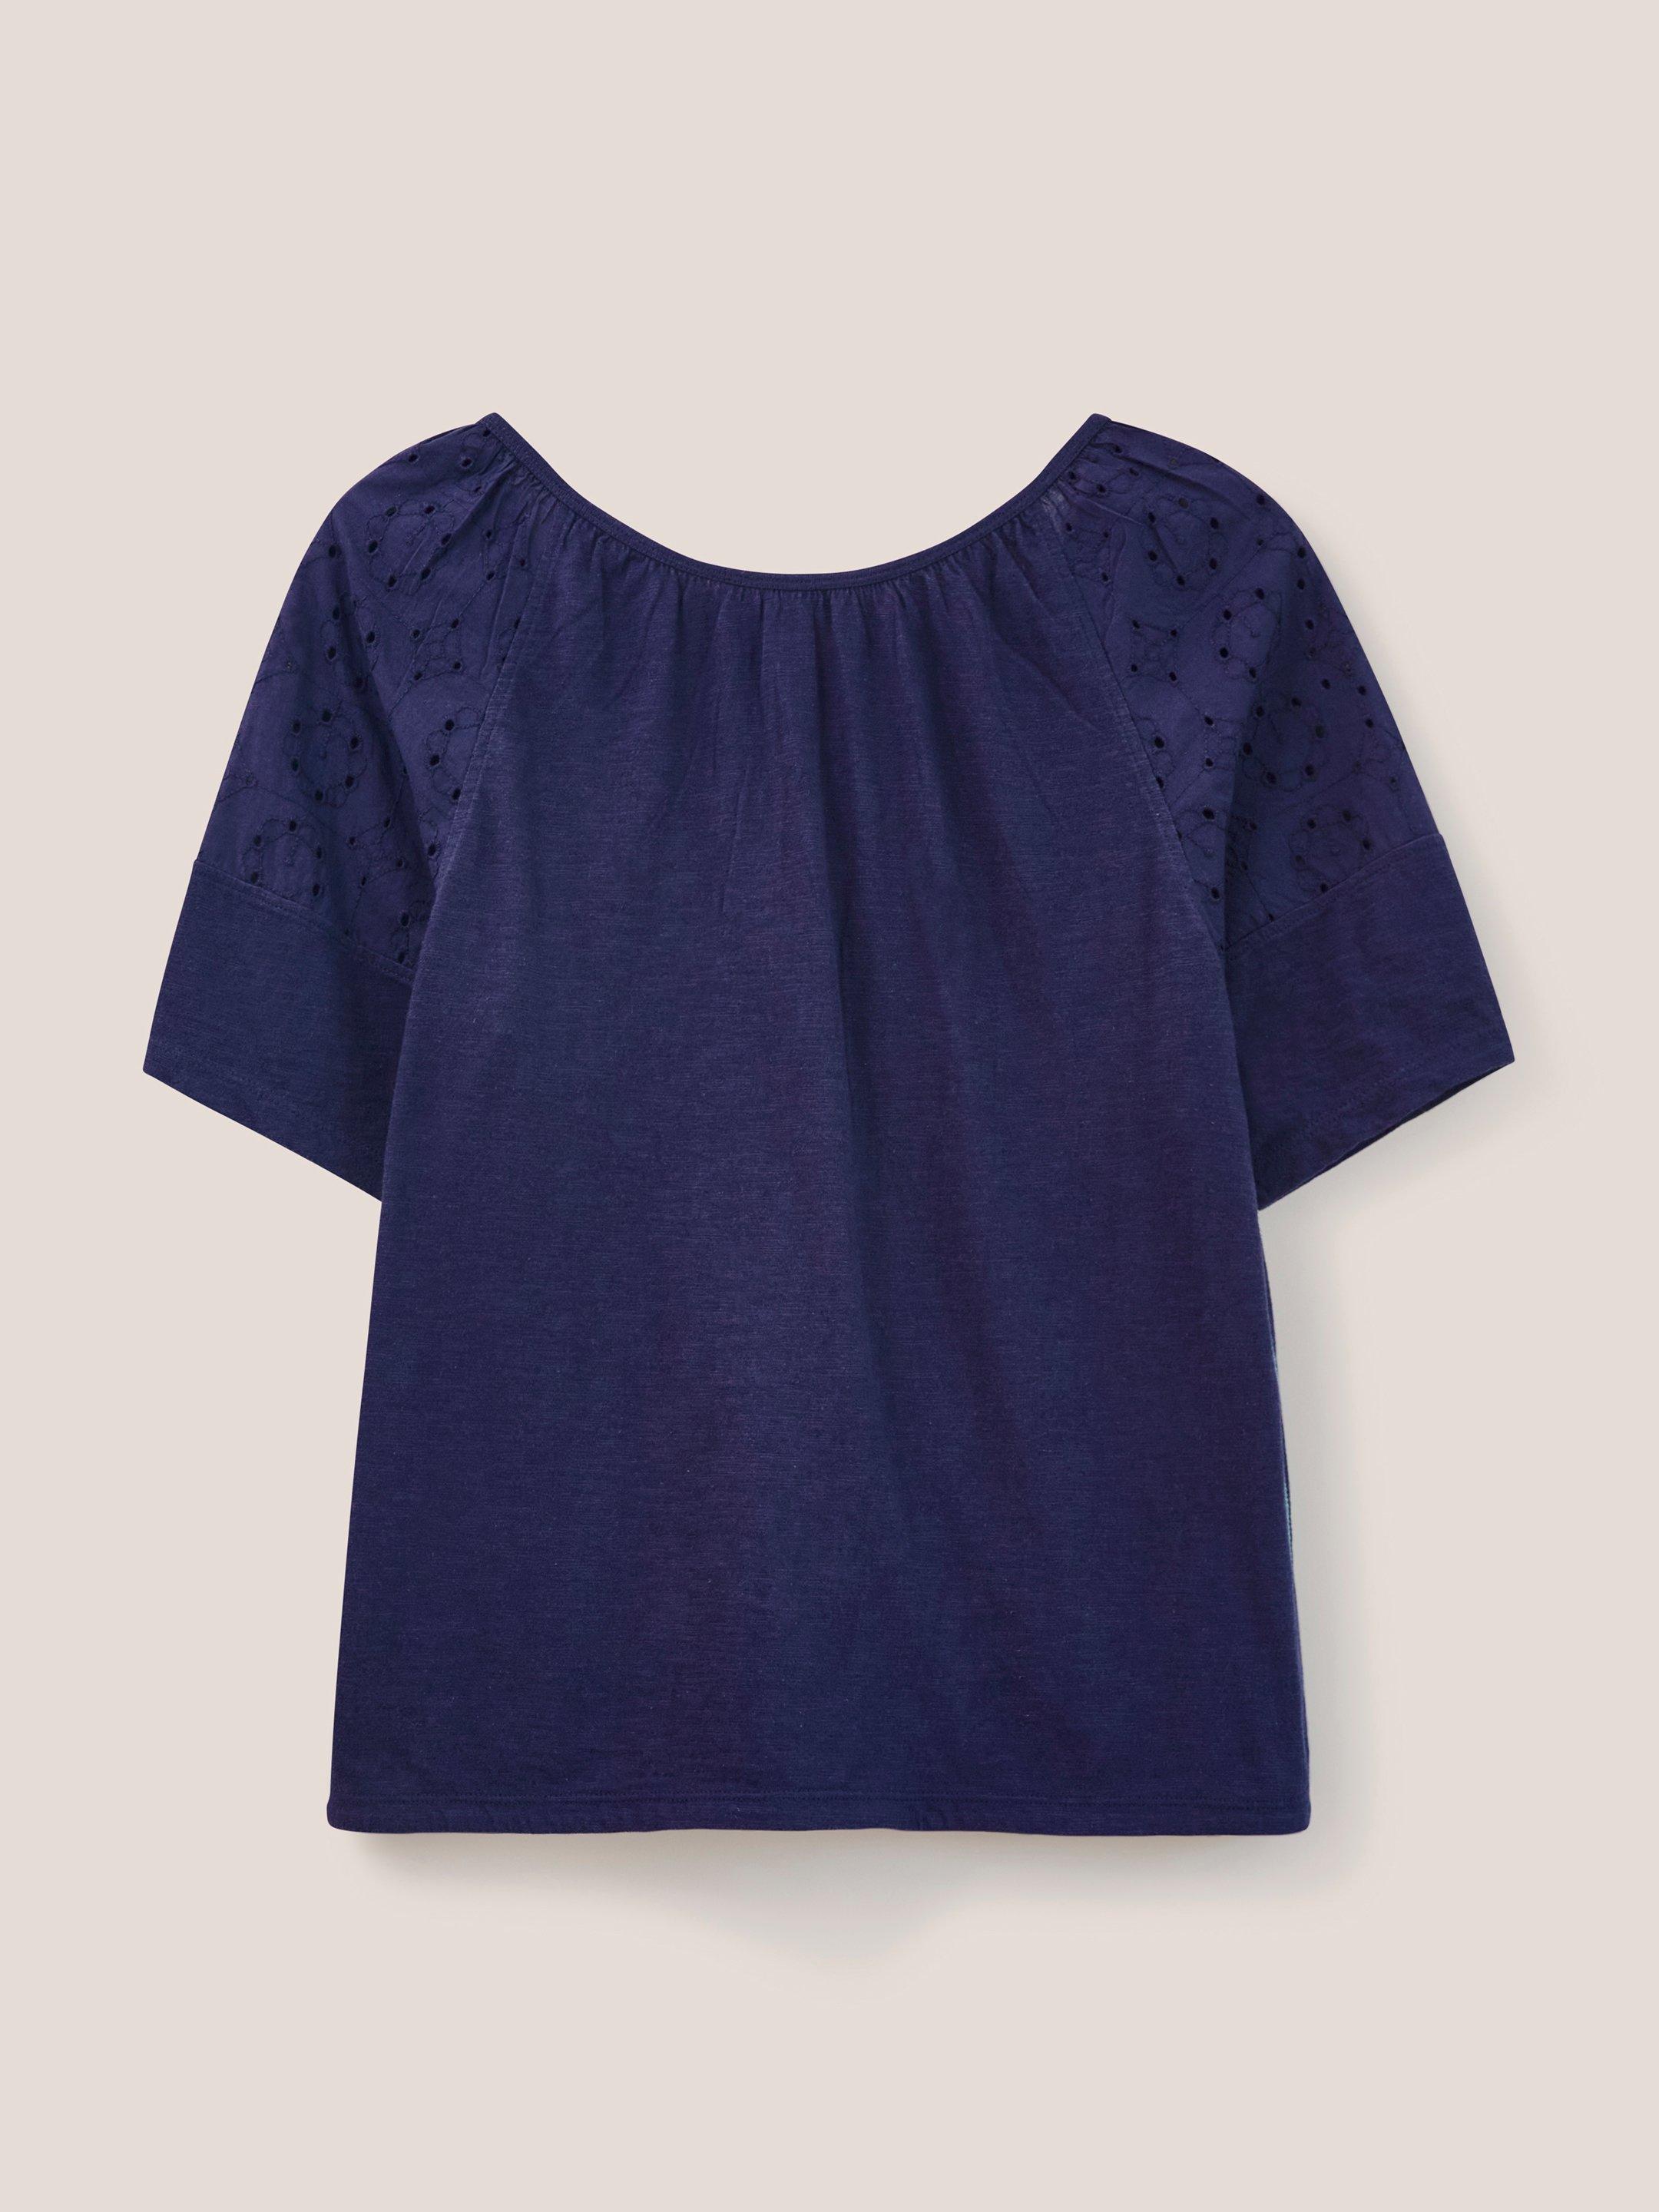 BRODERIE MIX TWO WAY TOP in FR NAVY - FLAT BACK